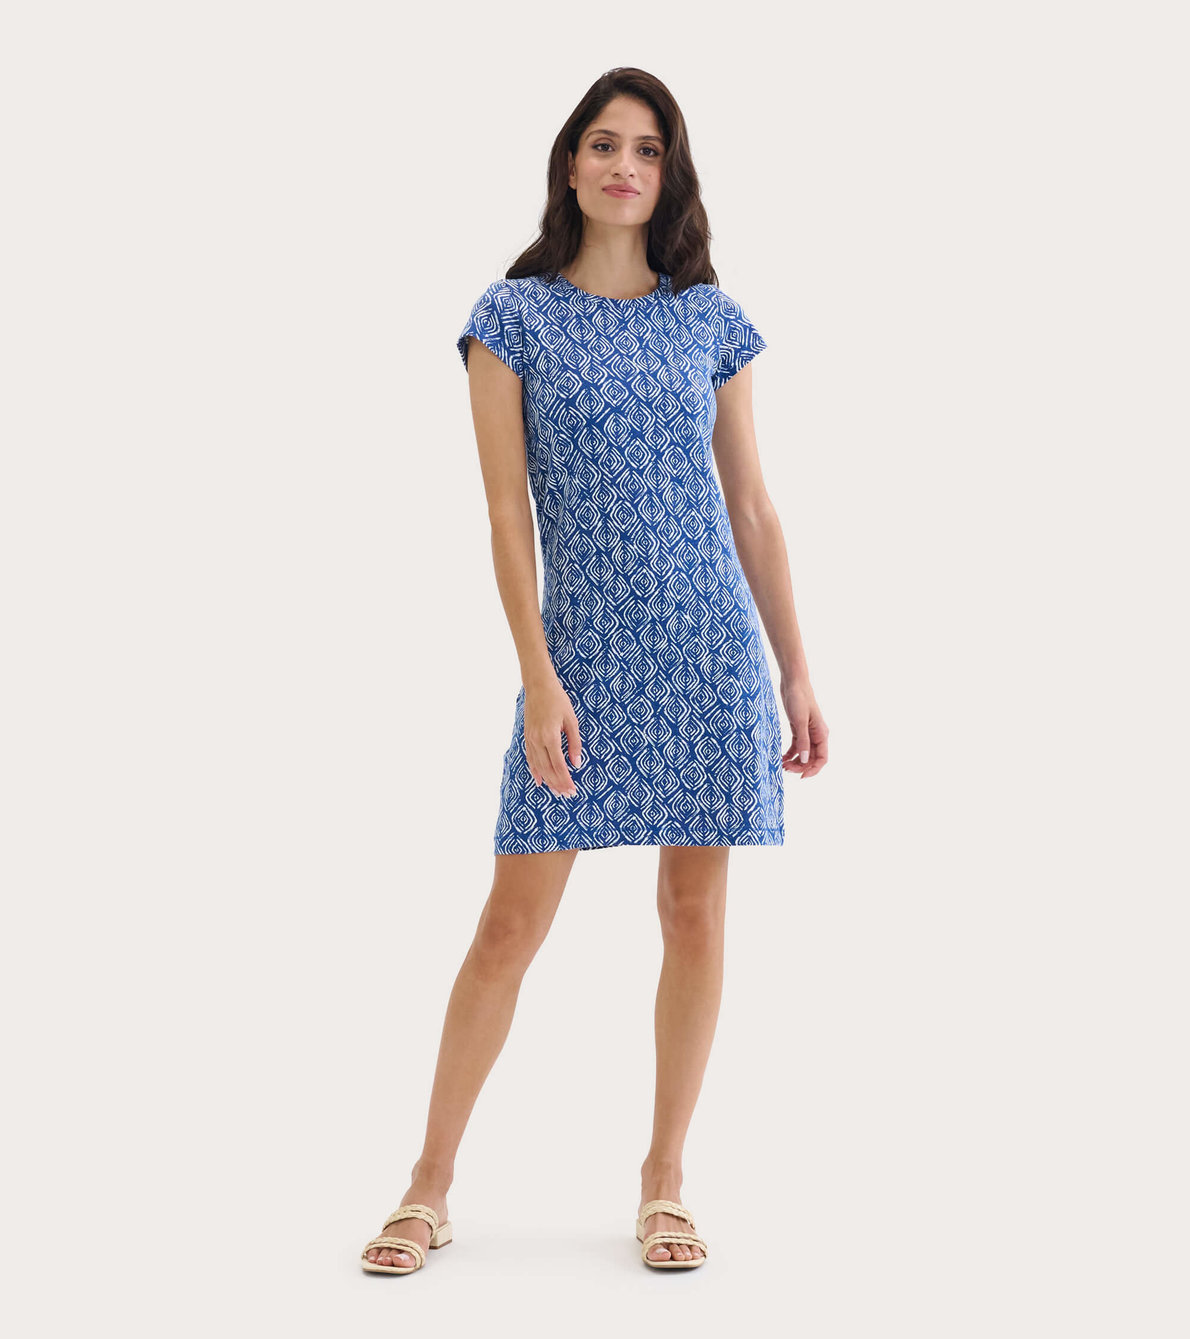 View larger image of Women's Ripples Crew Neck Tee Dress